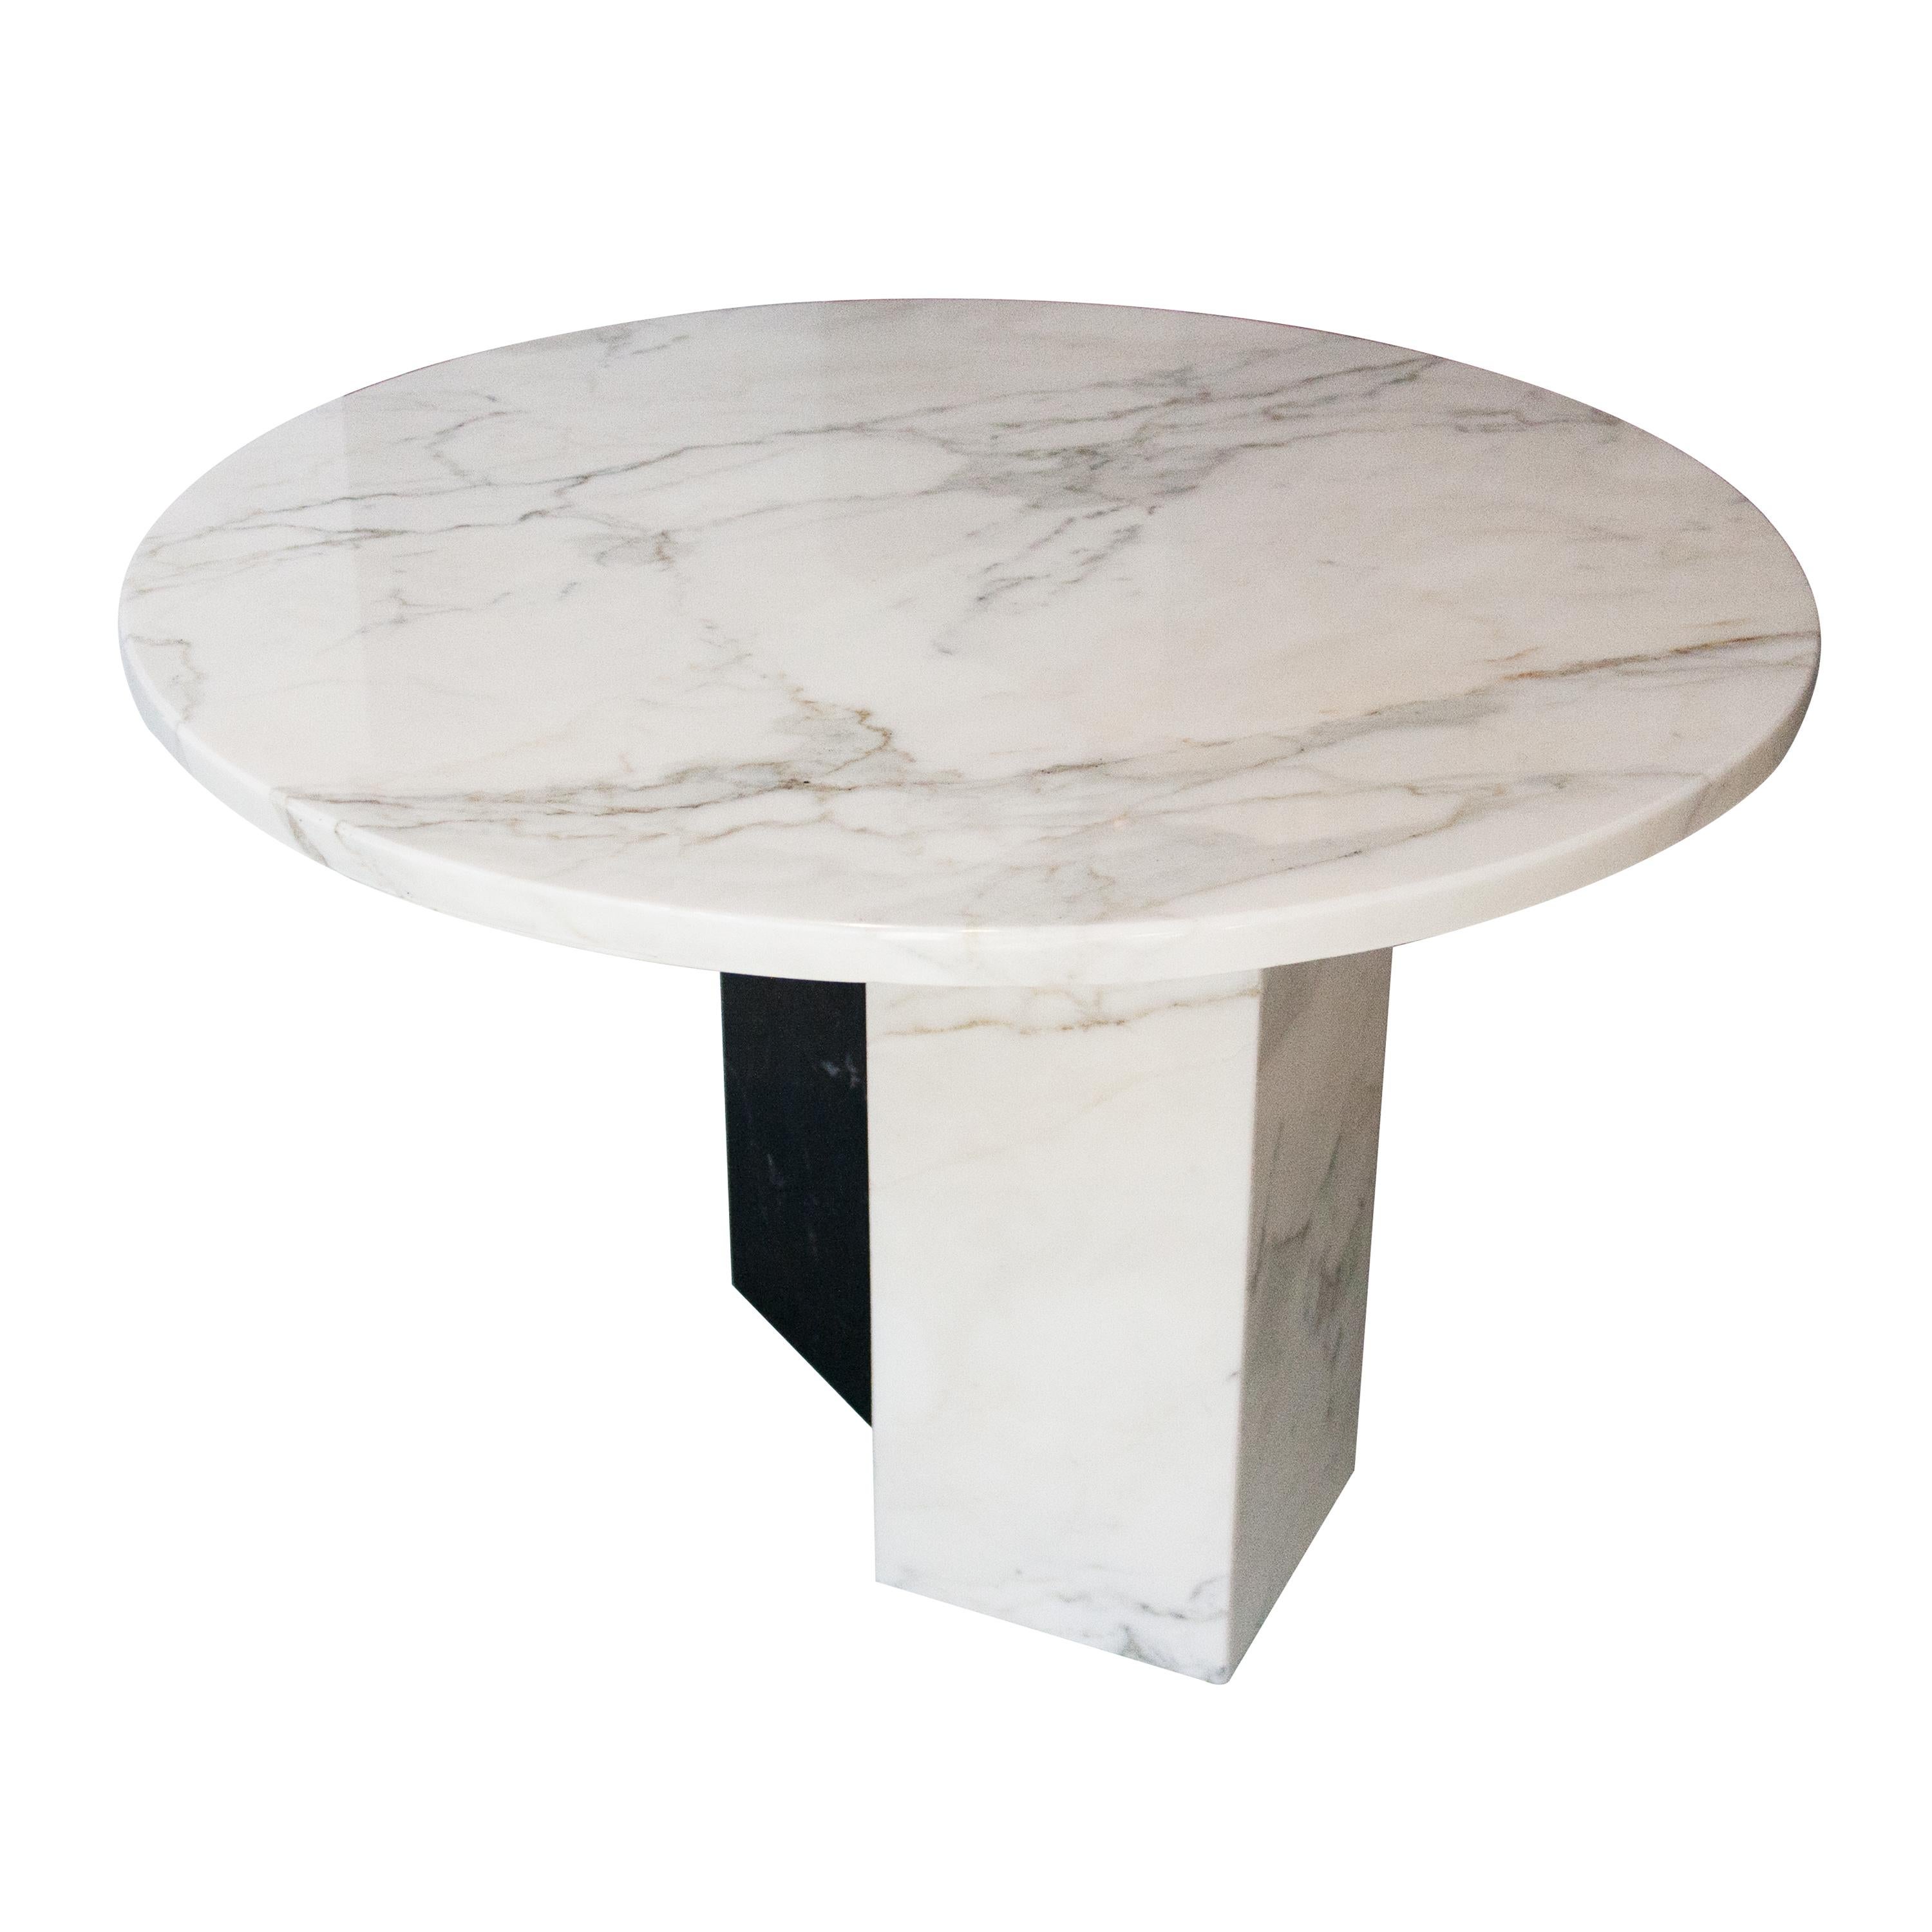 Contemporary Round Marble Coffee Table Design by IKB191, Spain, 2022 In Excellent Condition For Sale In Madrid, ES